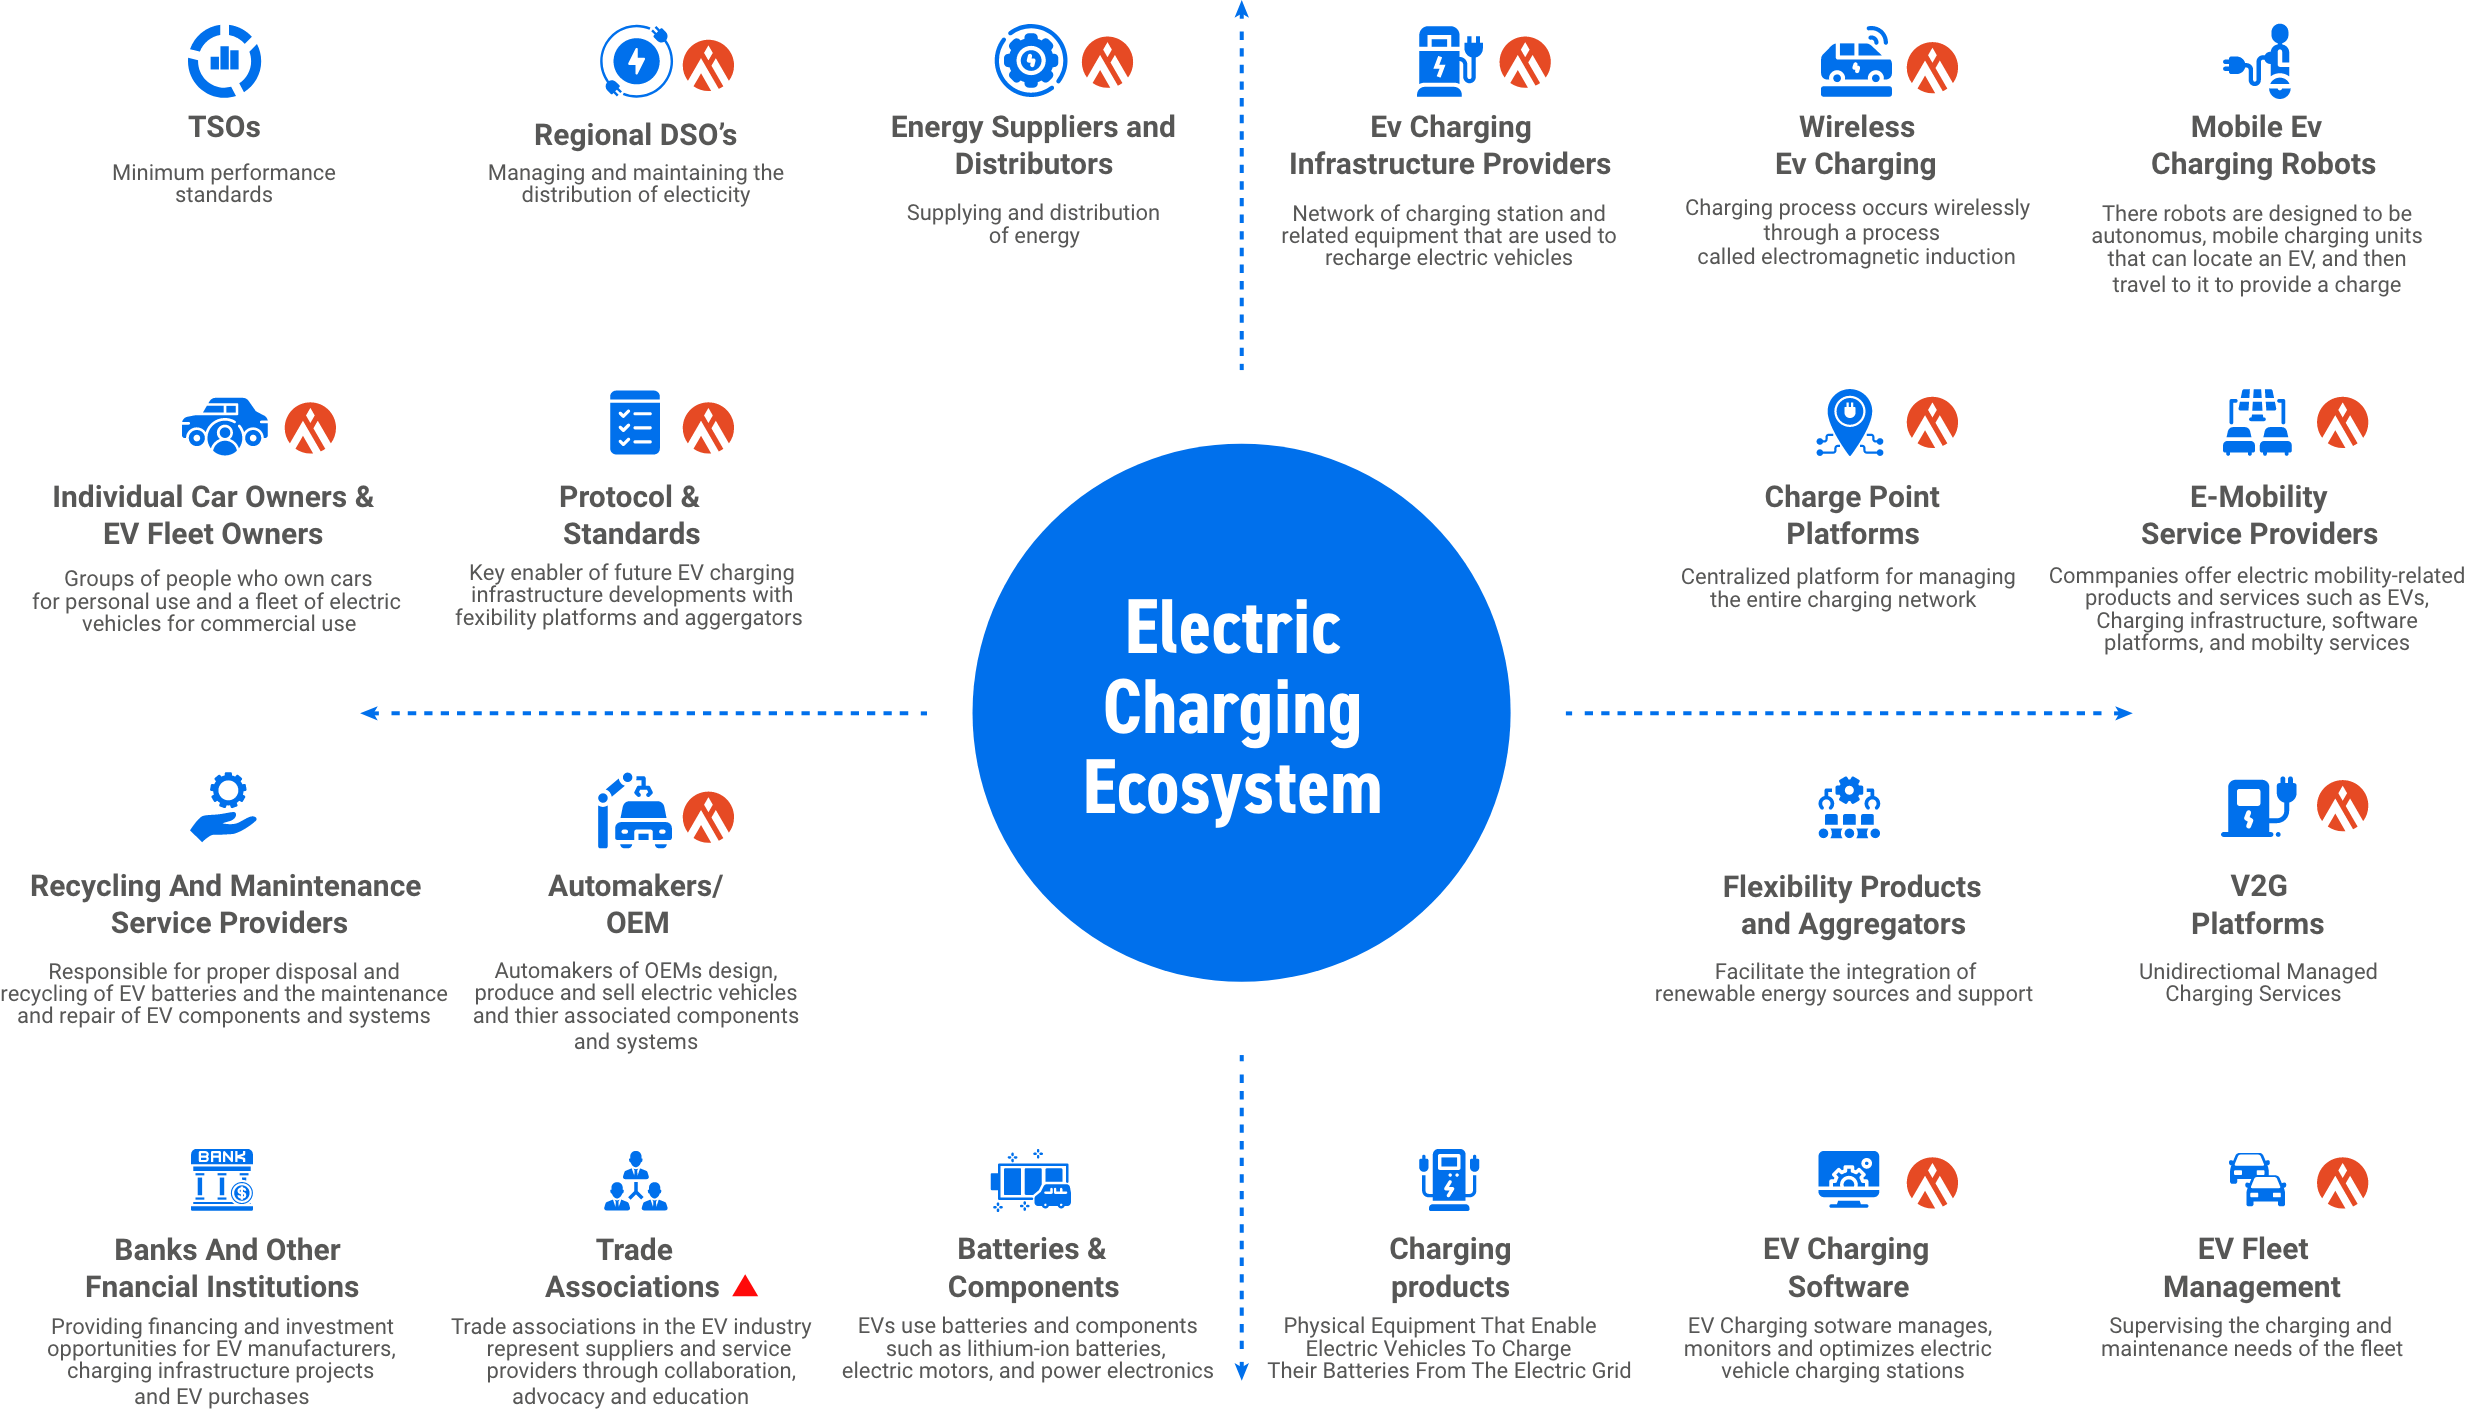 Electric Charging Ecosystem